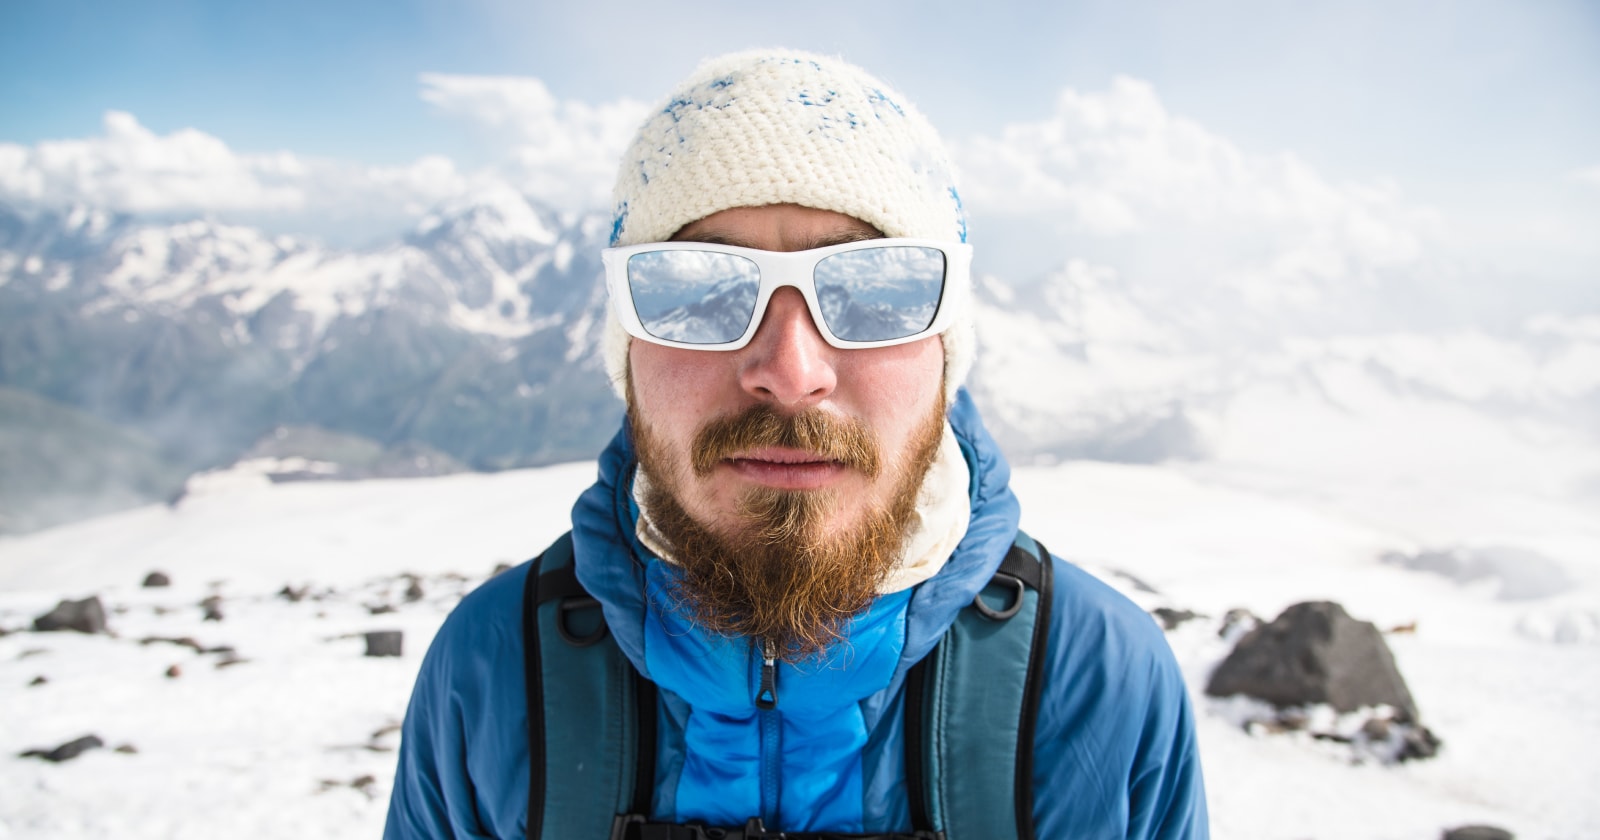 A man on a snowy mountain wearing goggle glasses